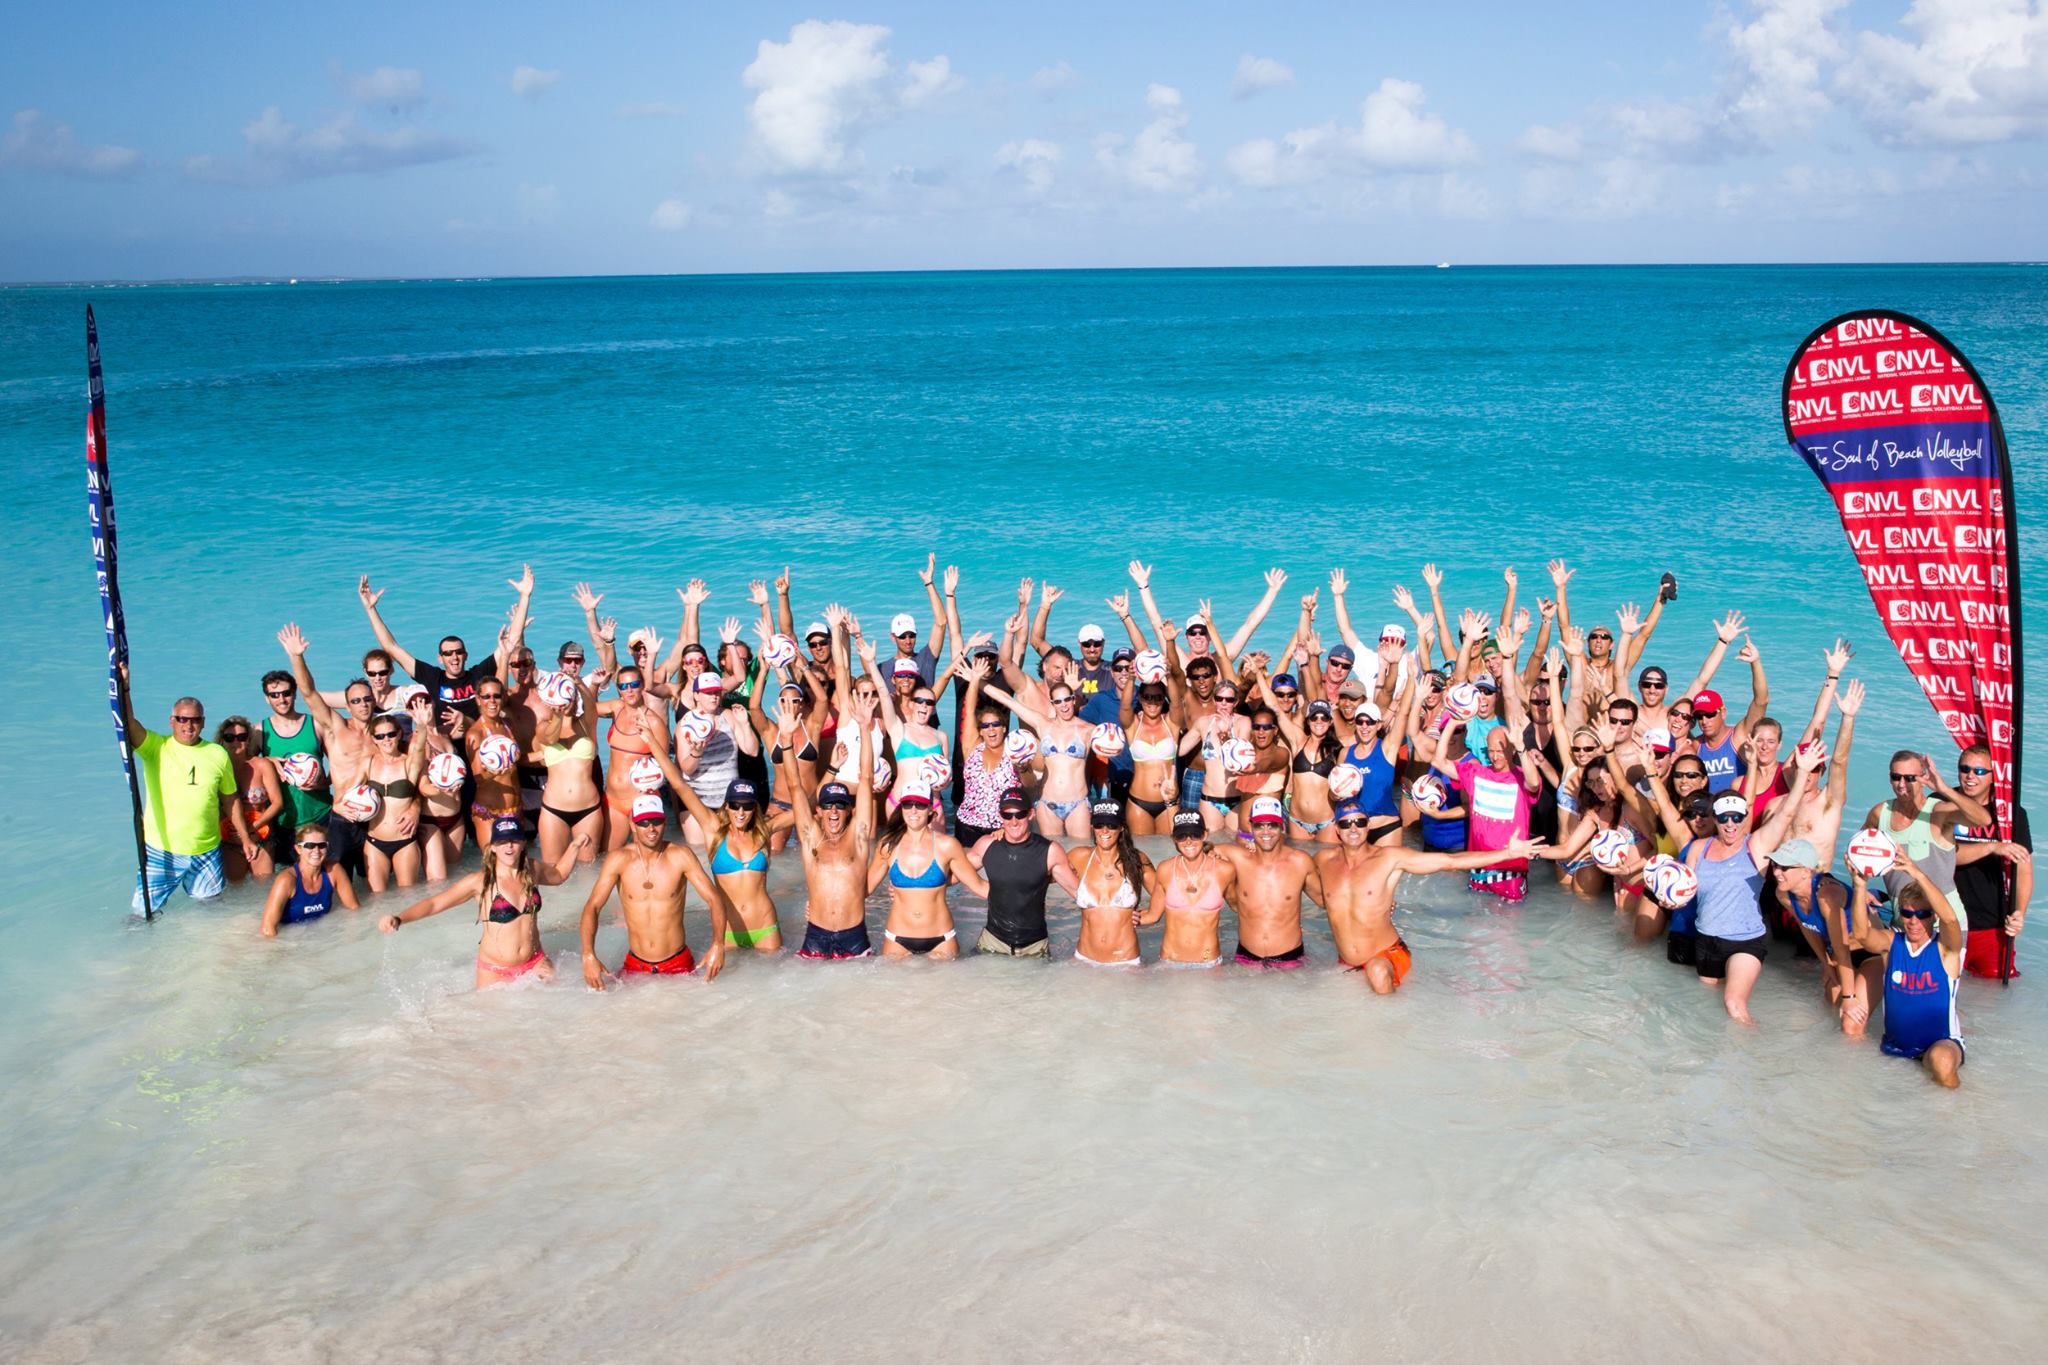 Top 10 Things You Missed from the 2015 Turks & Caicos Volleyball Vacation